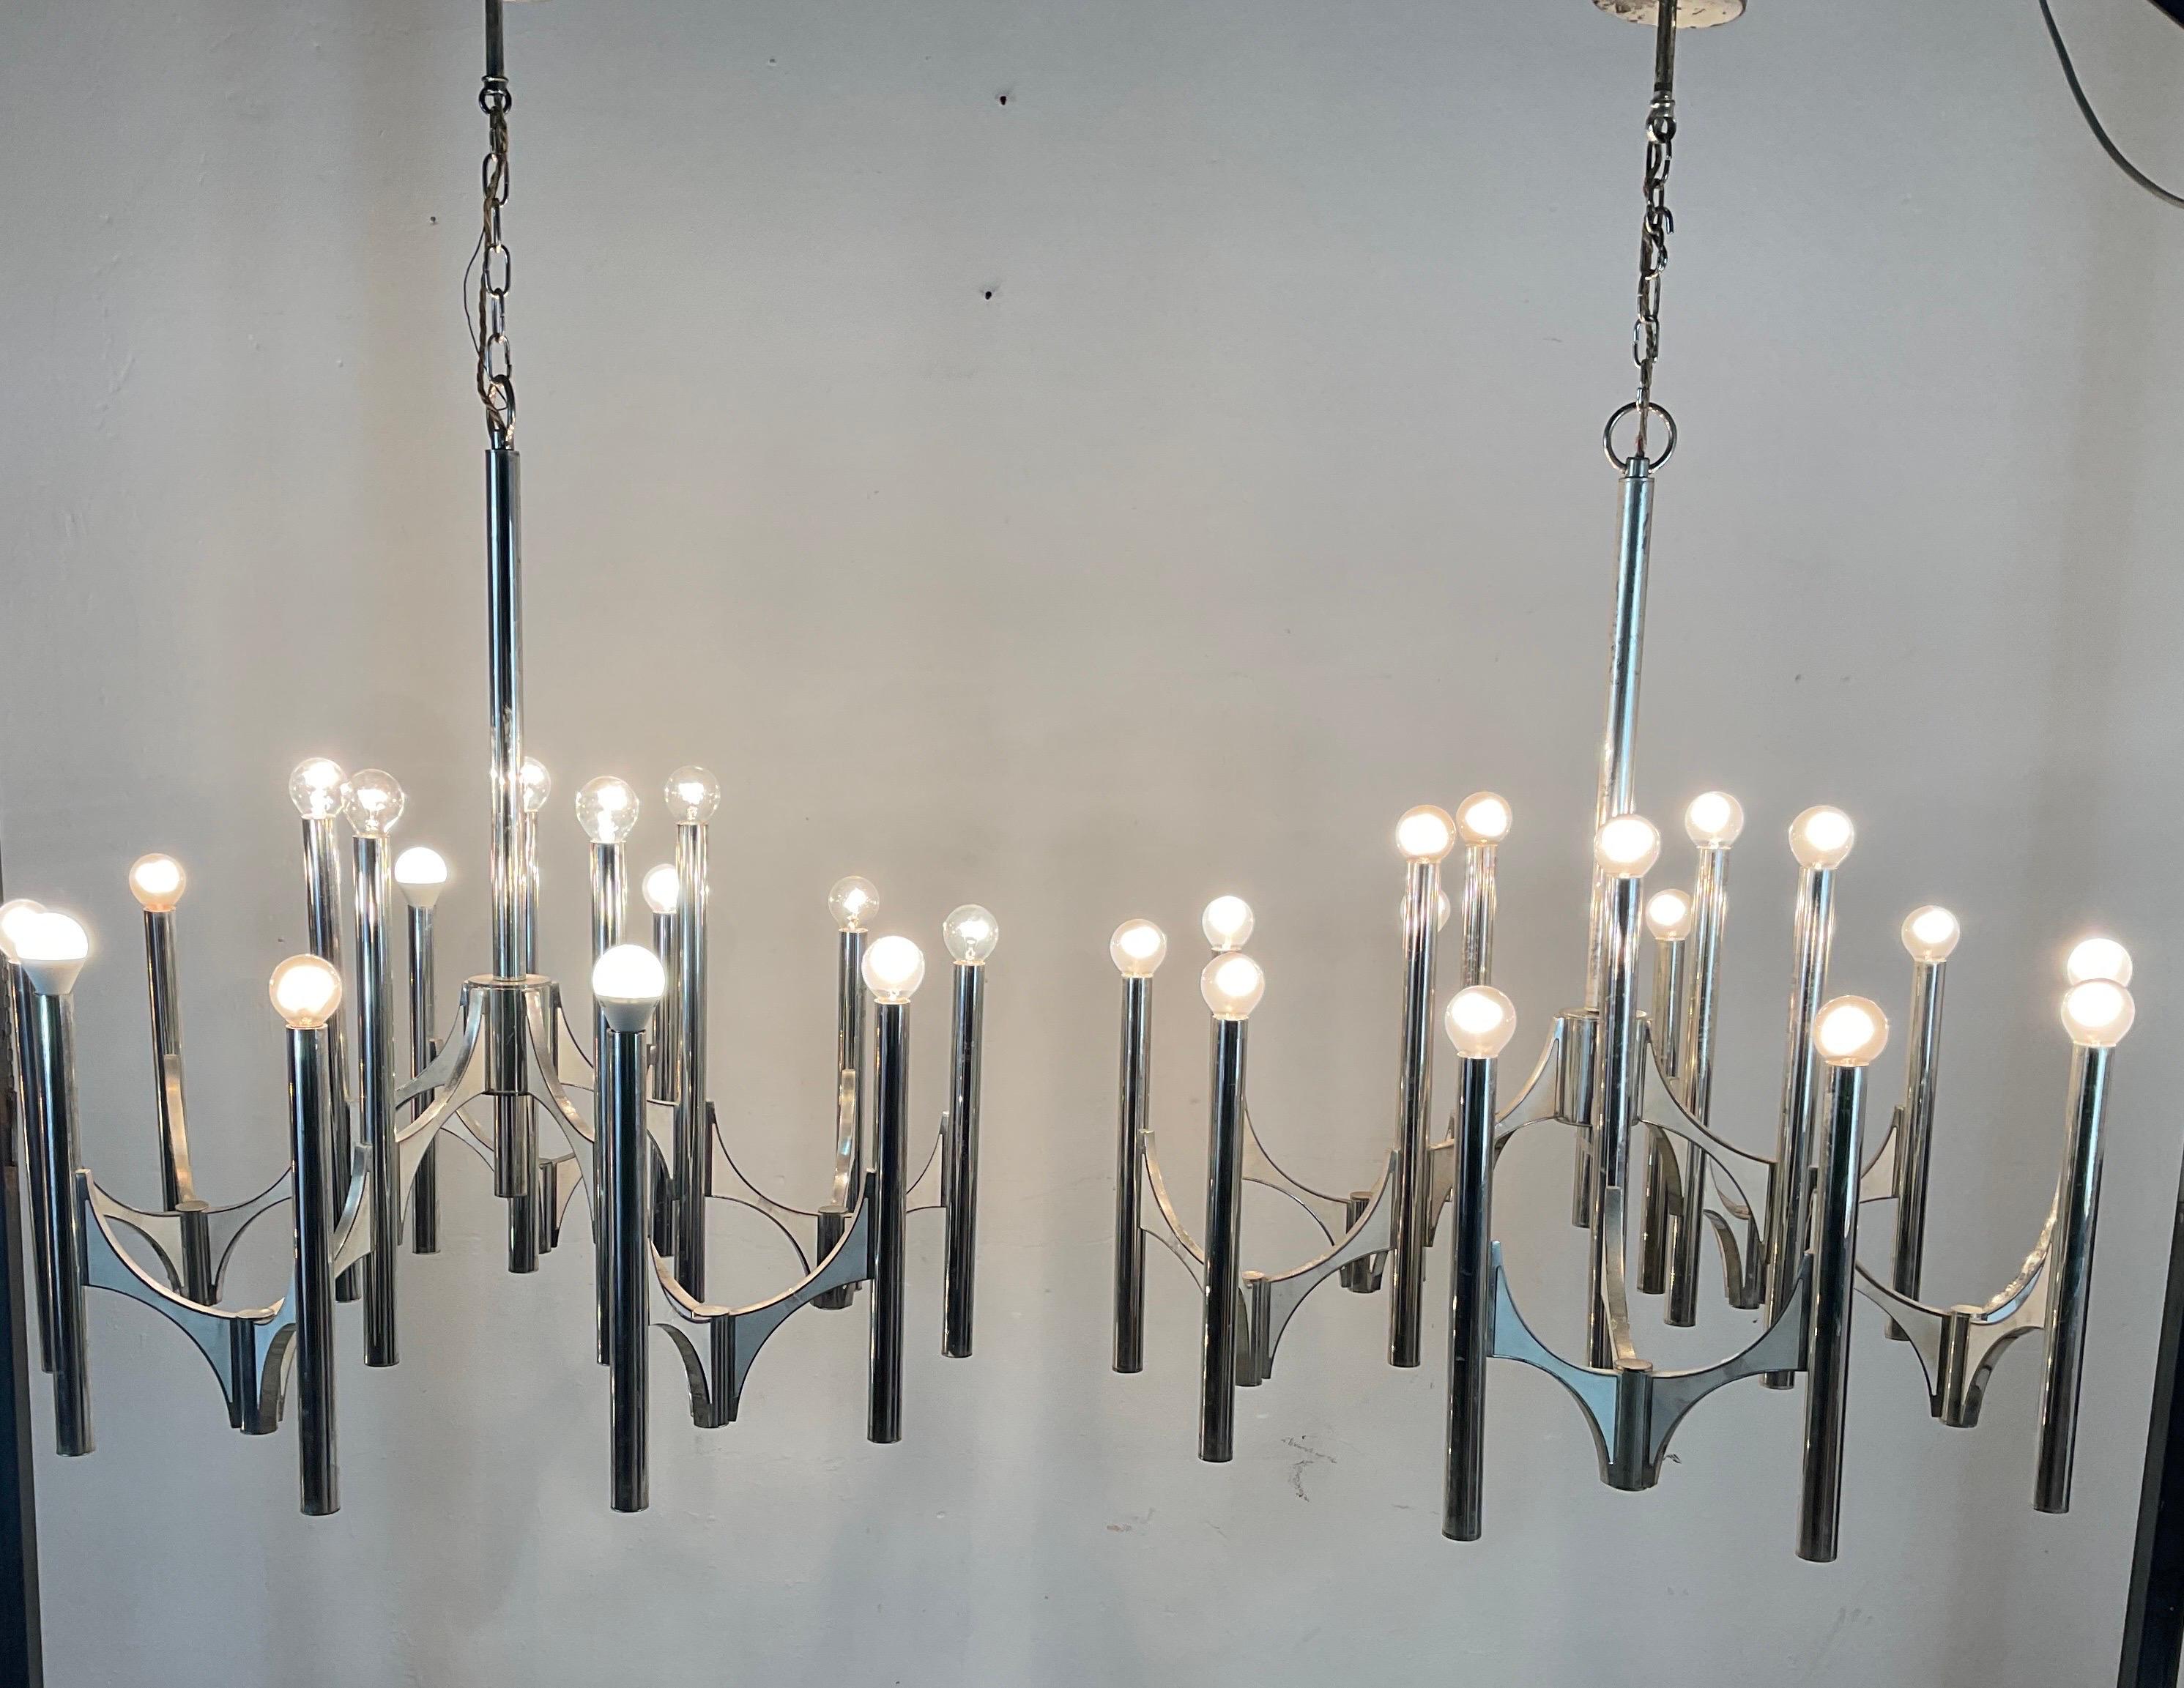 Pair of modernist chandeliers from the 60s, designed by Gaetano Sciolari for Lightoiler, Italy. Made from silver plated brass. The chandelier has 5 arms and offers fifteen light sources. A stunning combination of silvered vertical tubes and